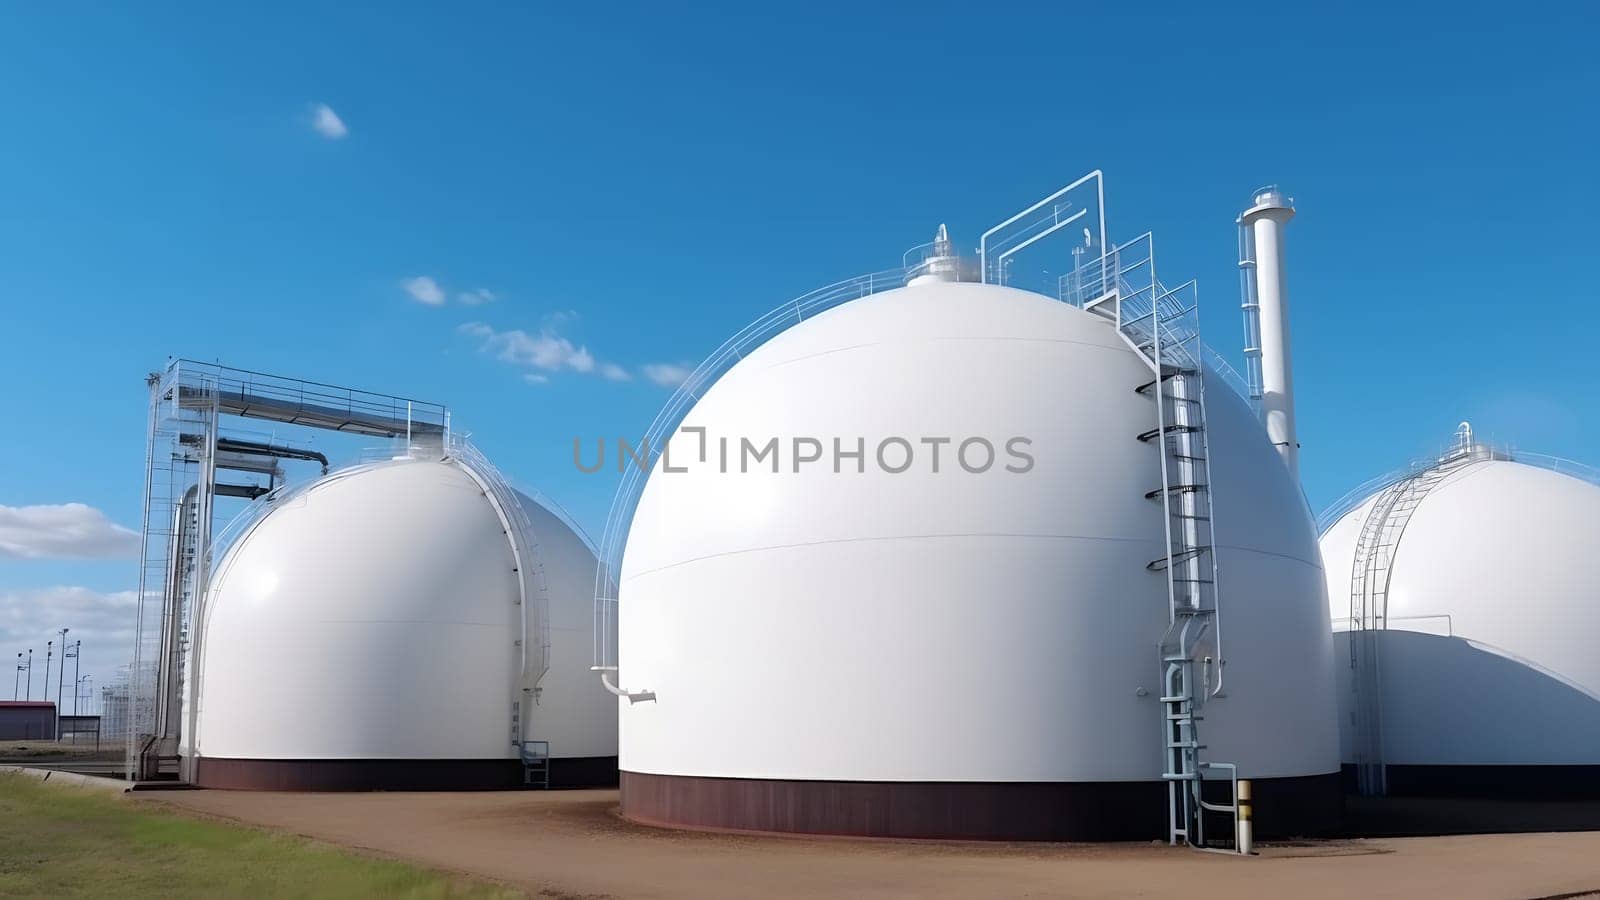 white spherical tanks for storing hydrogen gas at outdoor storage facility. Neural network generated in May 2023. Not based on any actual person, scene or pattern.